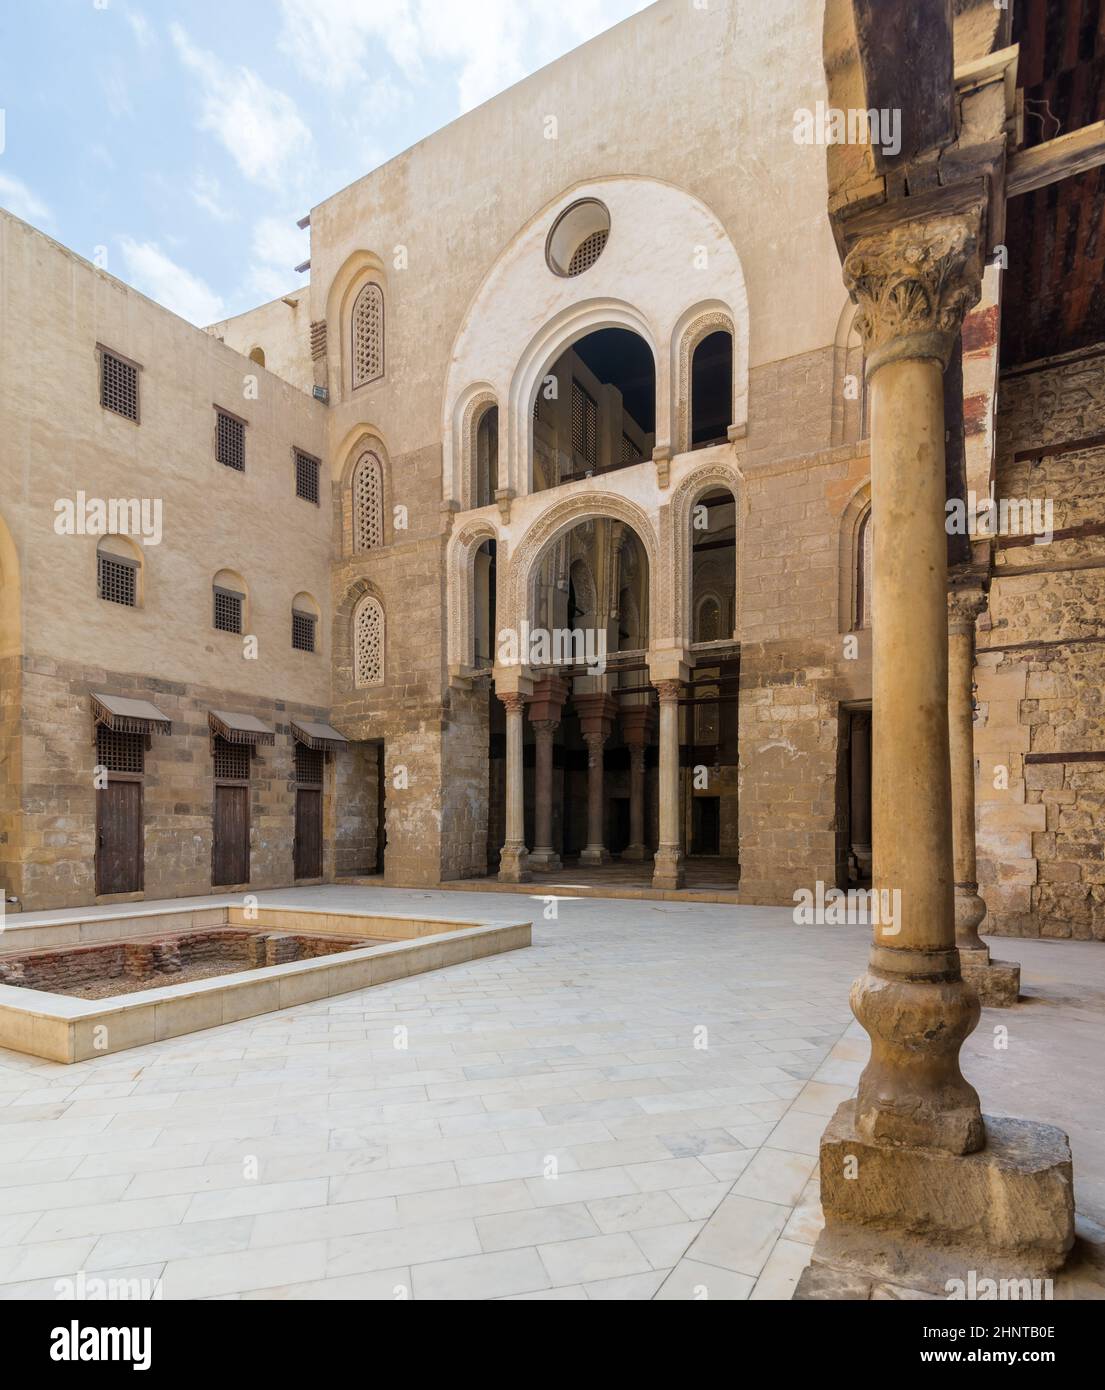 Main courtyard of Mamluk era public historic mosque of Sultan Qalawun with stone column in the front, Cairo, Egypt Stock Photo